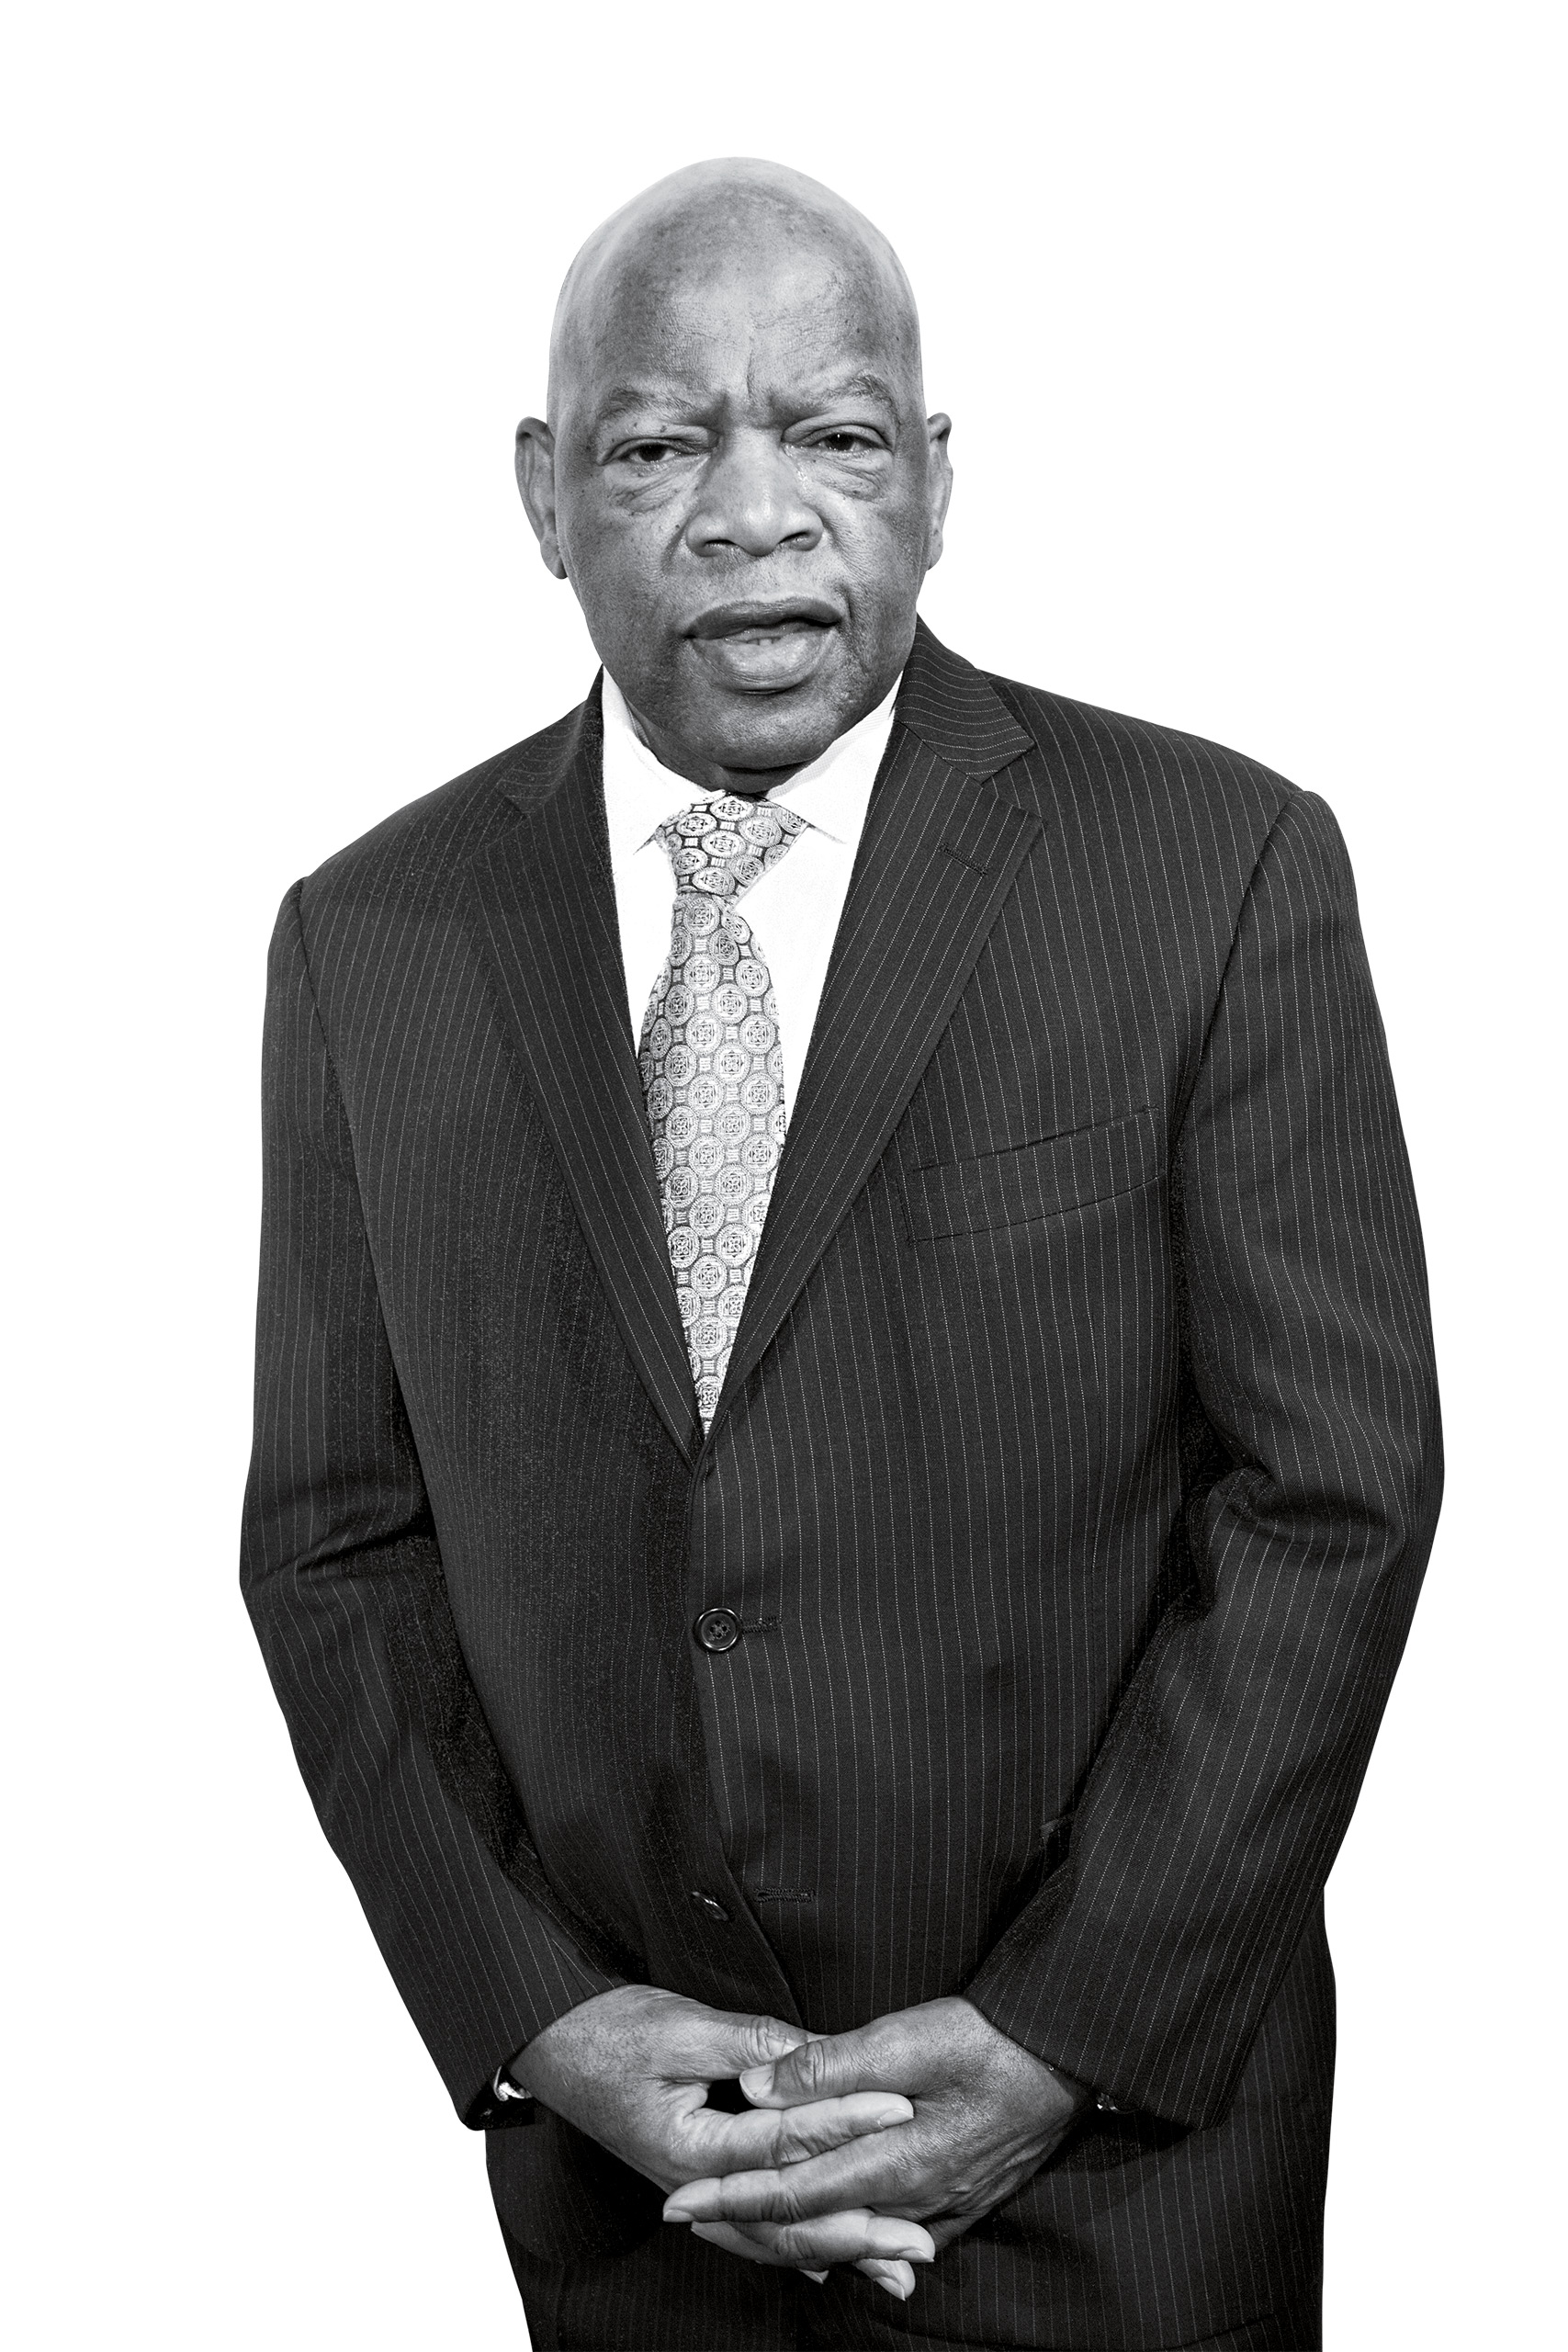 John Lewis, on Health Care, Trump Protests and Race Today | Time